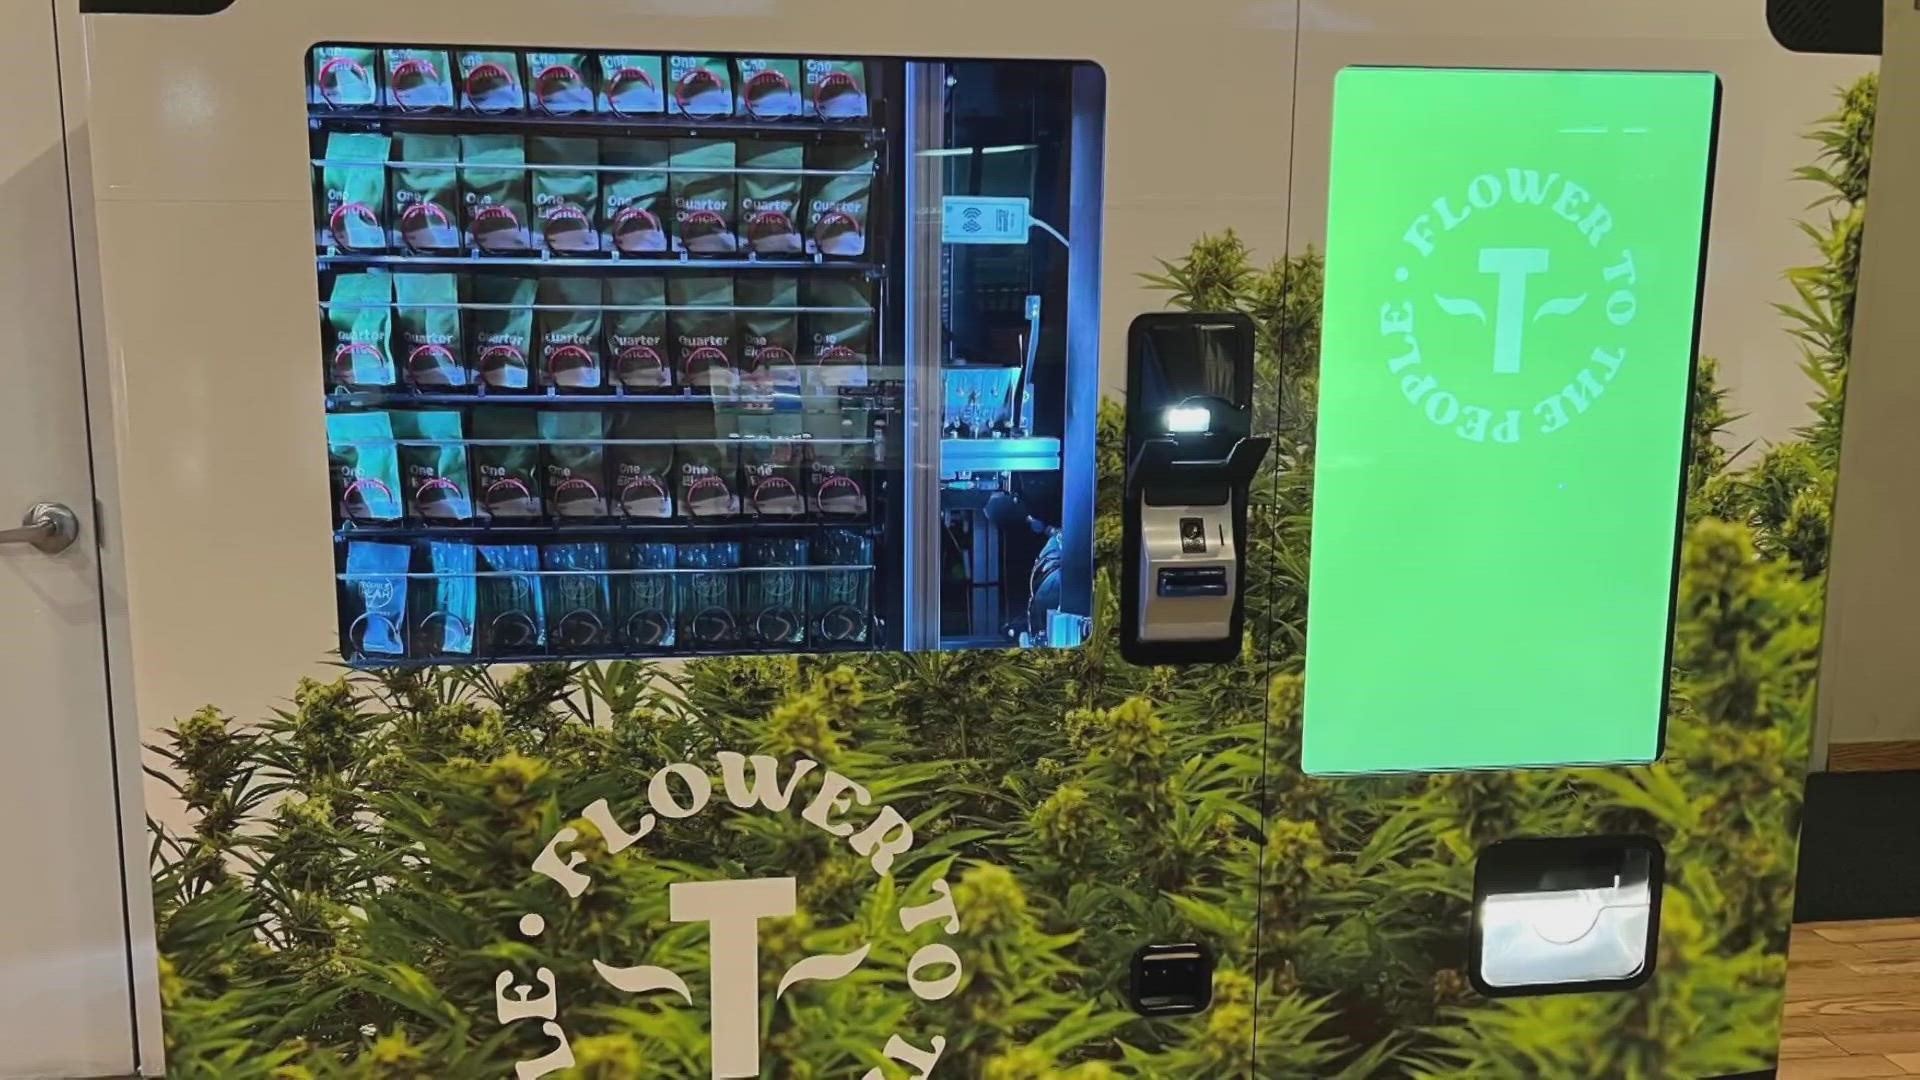 Colorado is home to a first-of-its-kind cannabis digital vending kiosk.